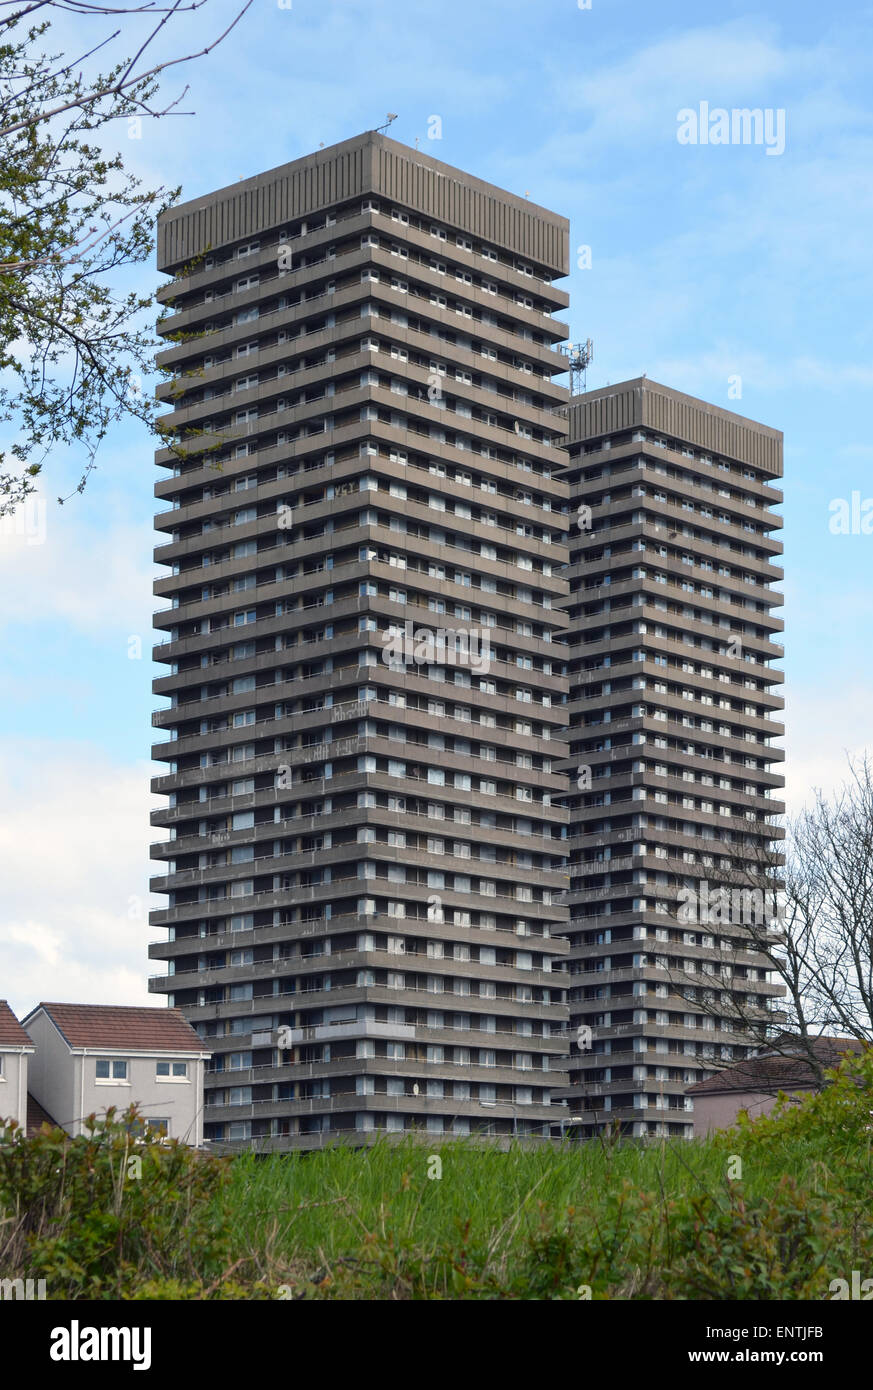 Scotland's tallest residential high-rise flats. The Whitevale and Bluevale flats, in the Gallowgate Stock Photo